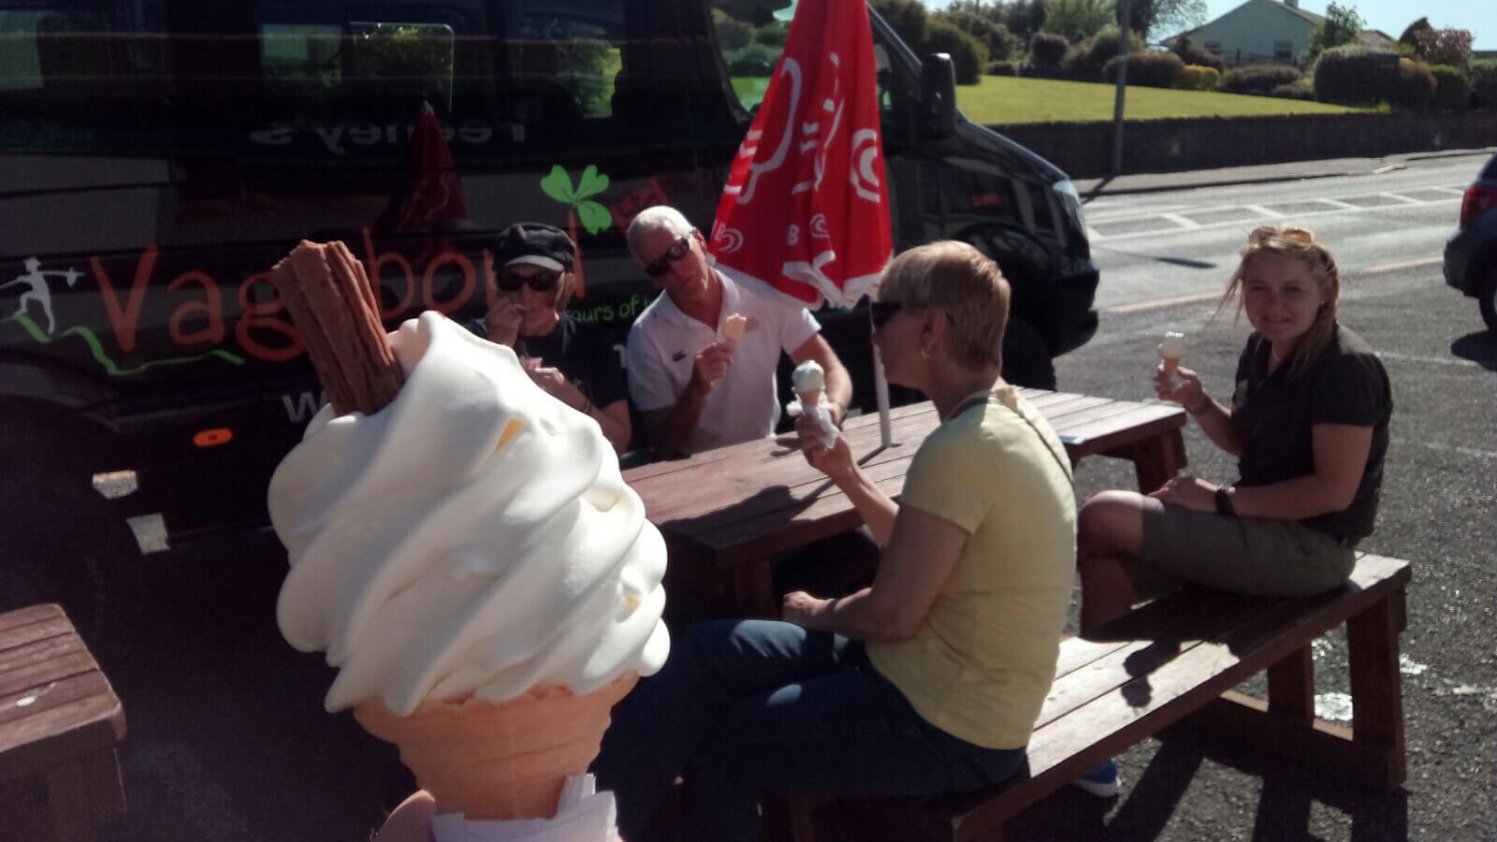 Ice cream cone with chocolate flake in the foreground, with Vagabond tour guests and tour vehicle in the background, slightly out of focus